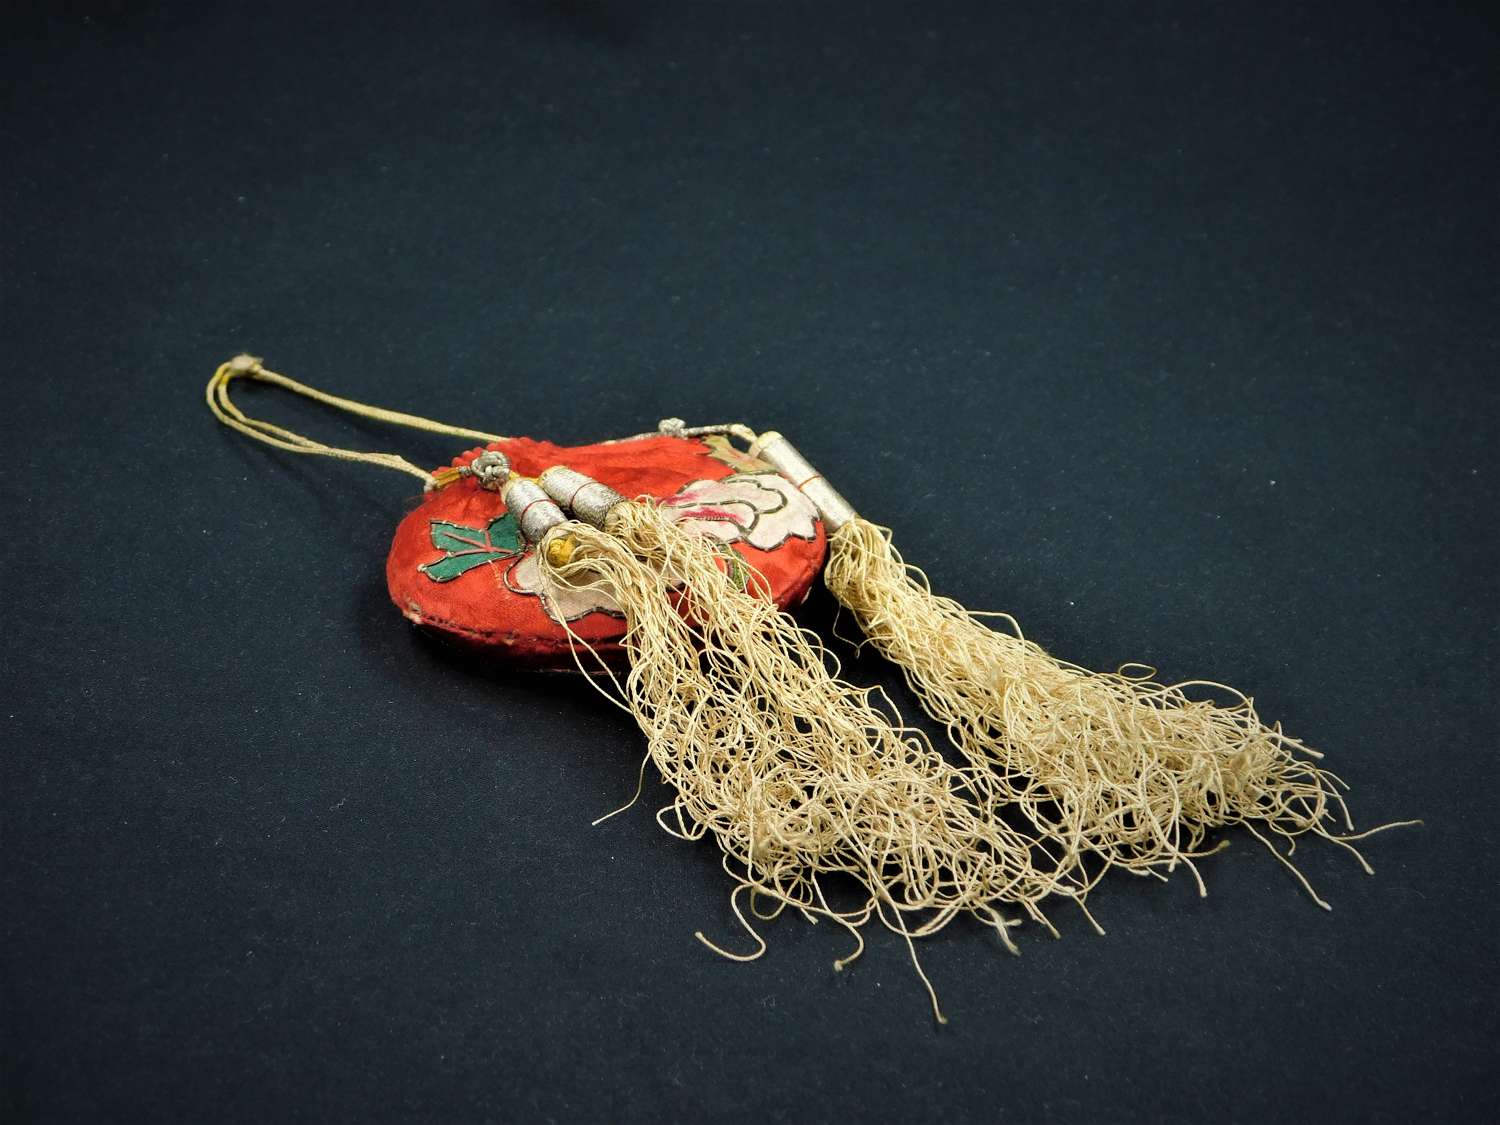 Chinese Silk Snuff Bottle Pouch